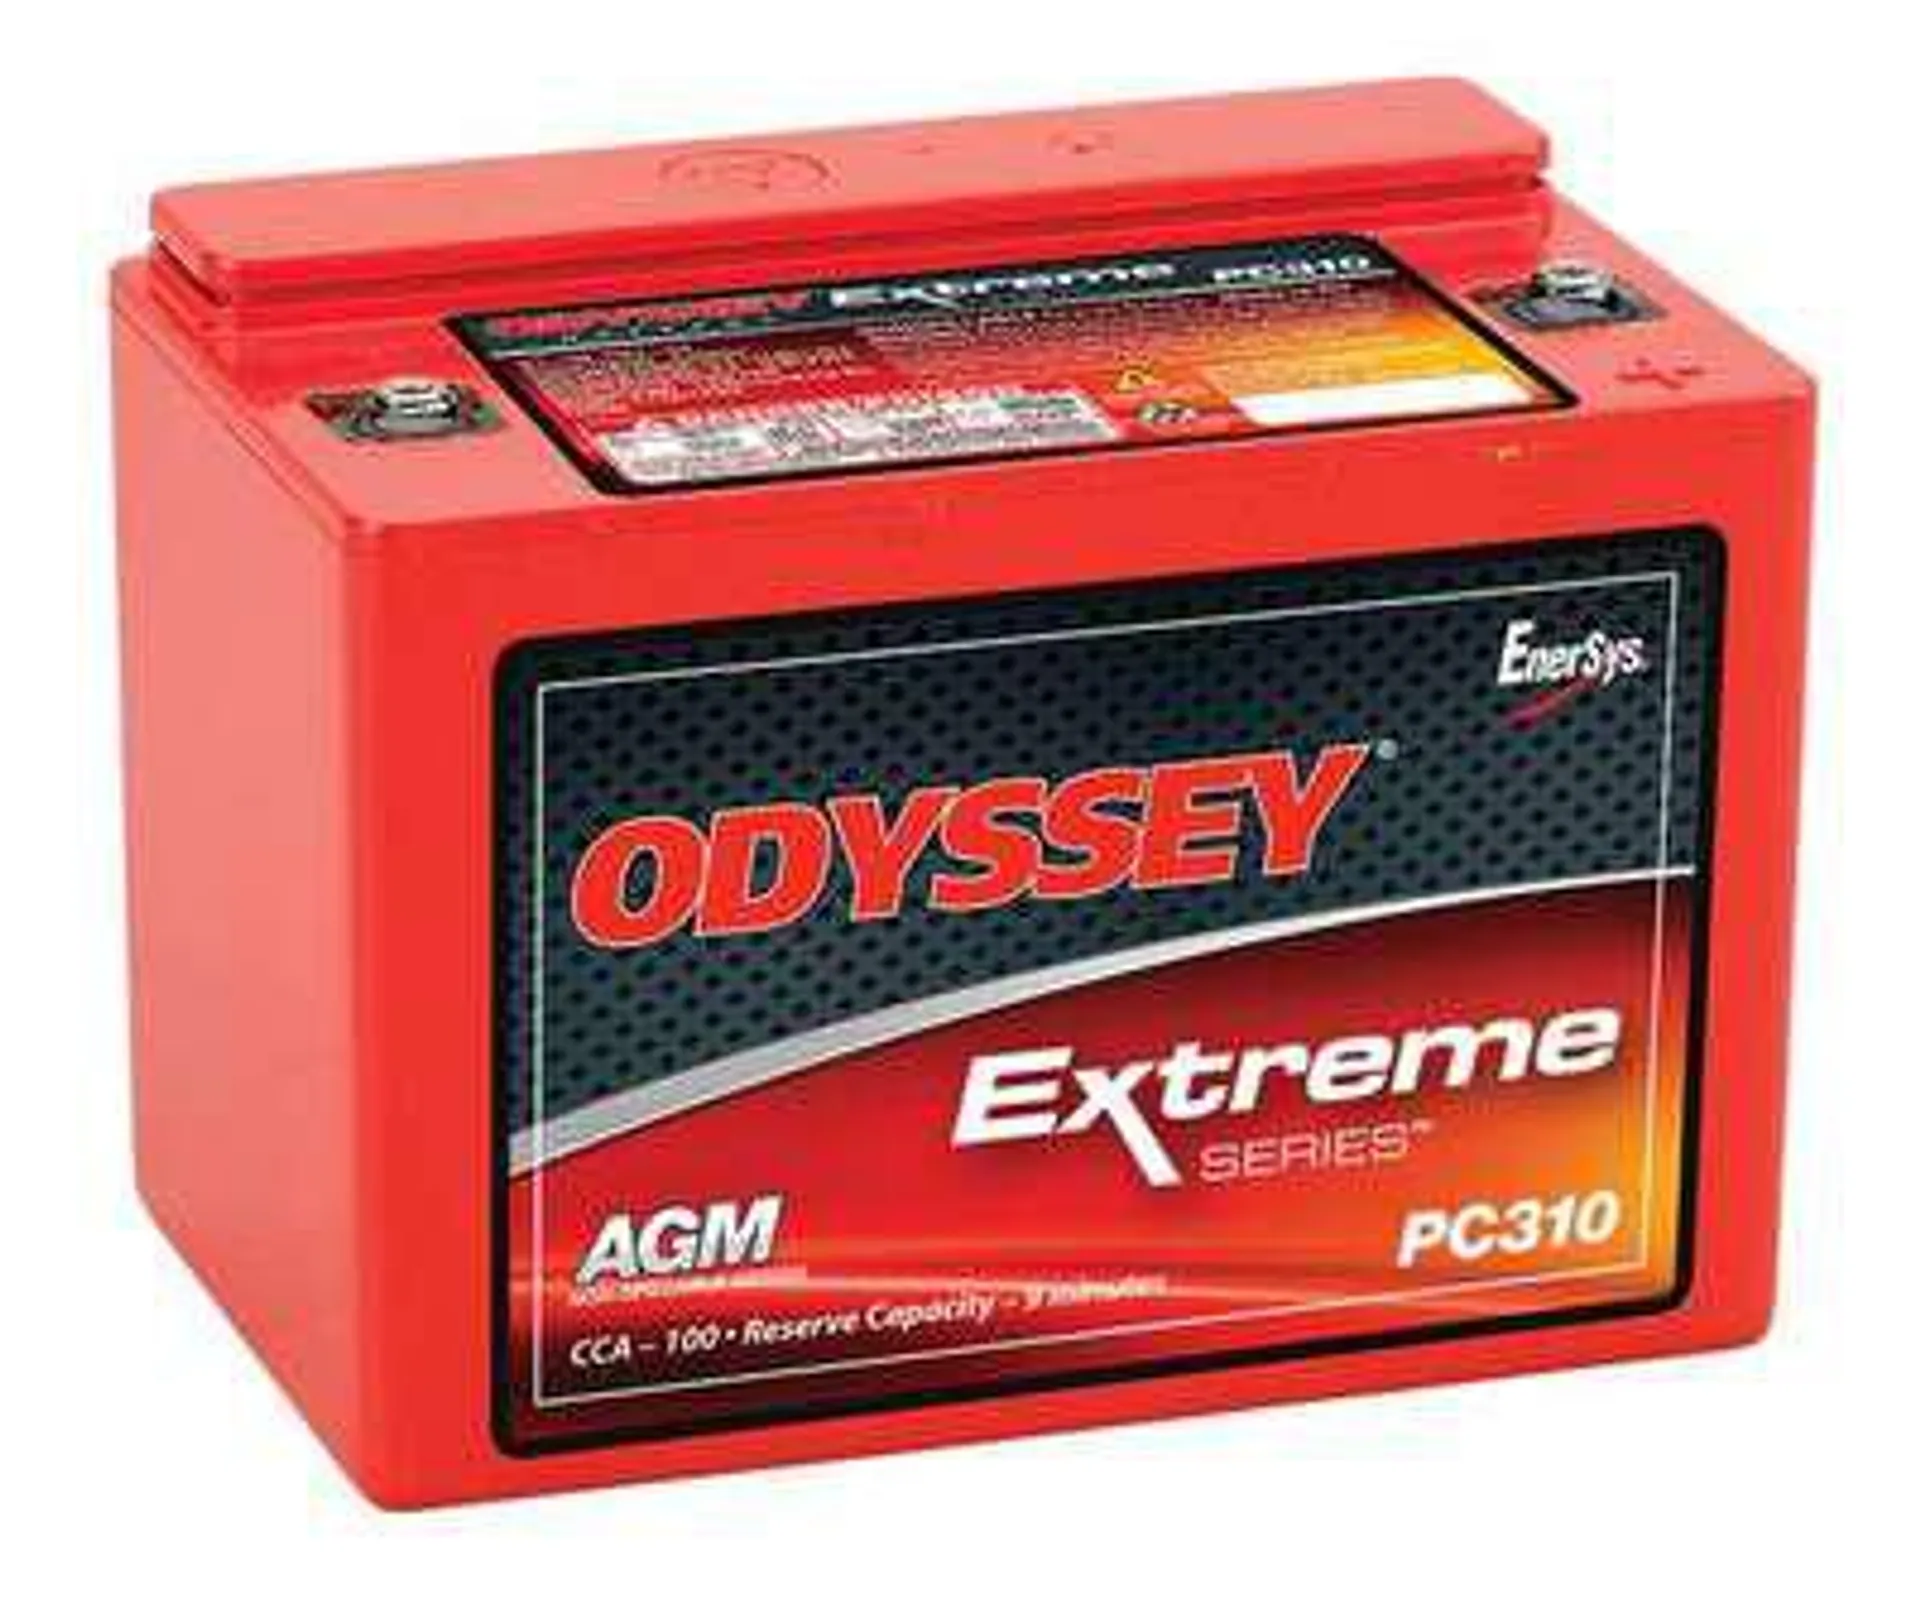 PC310 Odyssey Extreme Series battery